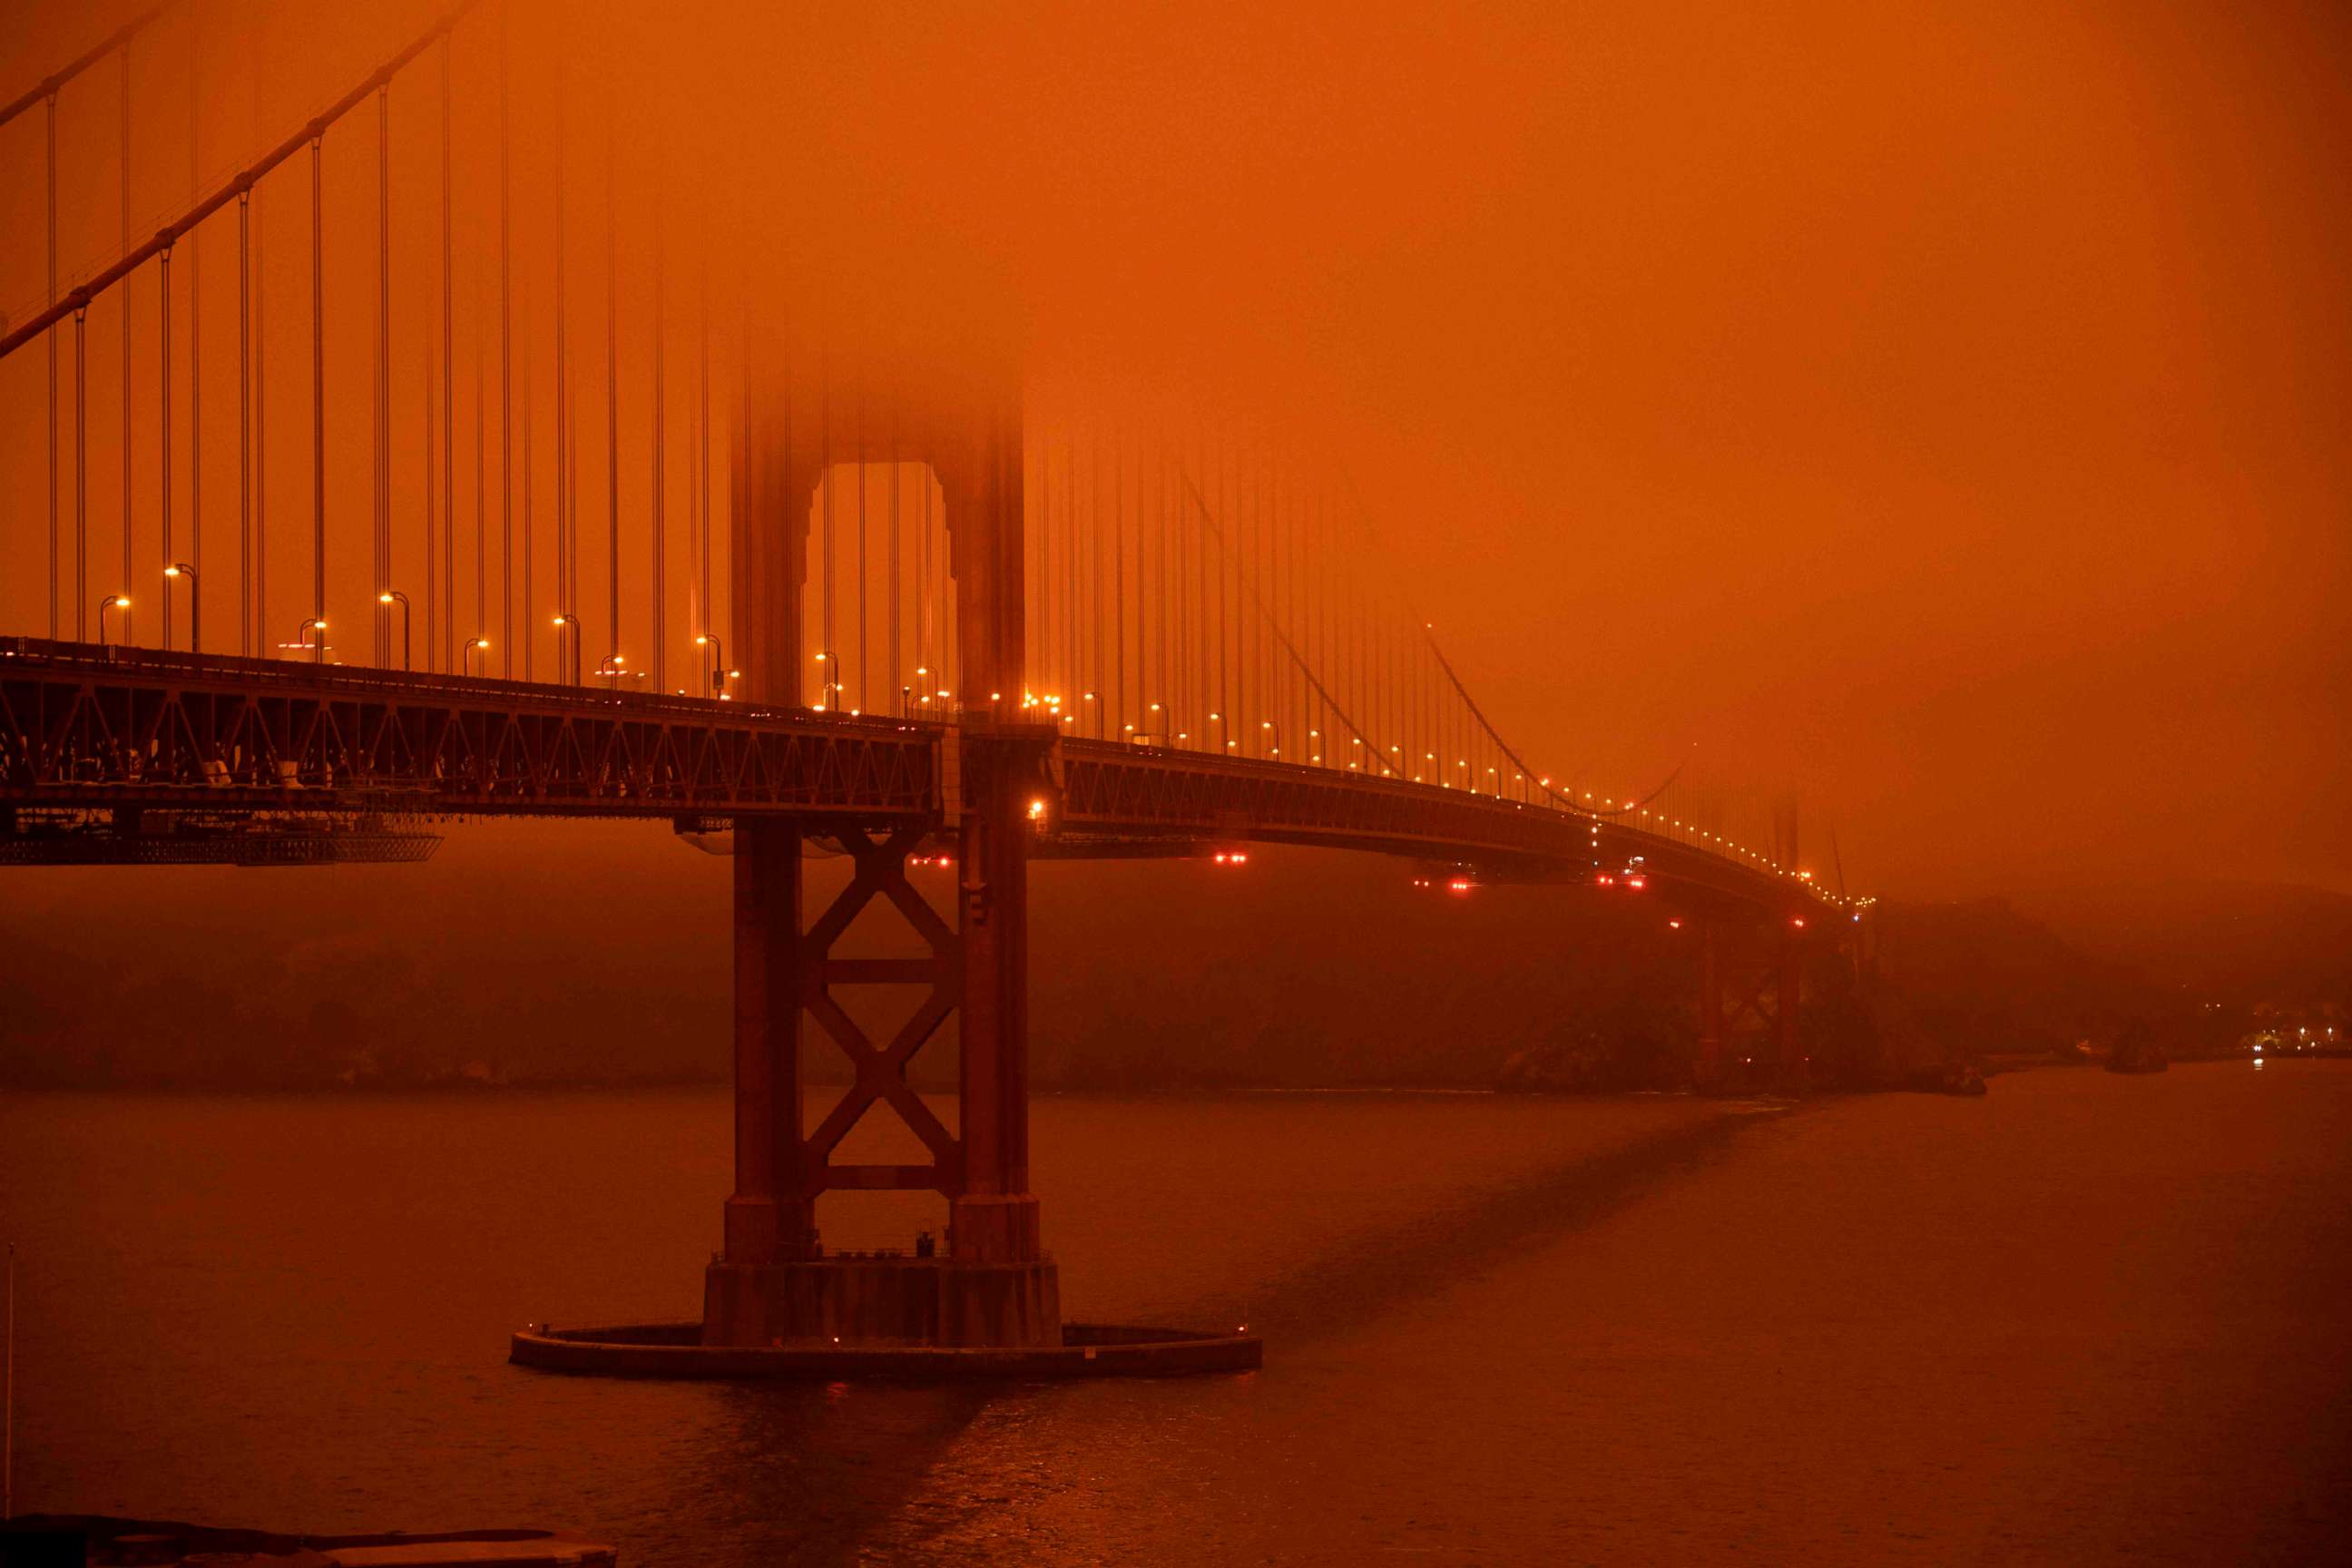 PHOTO: Cars drive along the Golden Gate Bridge under an orange smoke filled sky at midday in San Francisco, Sept. 9, 2020.